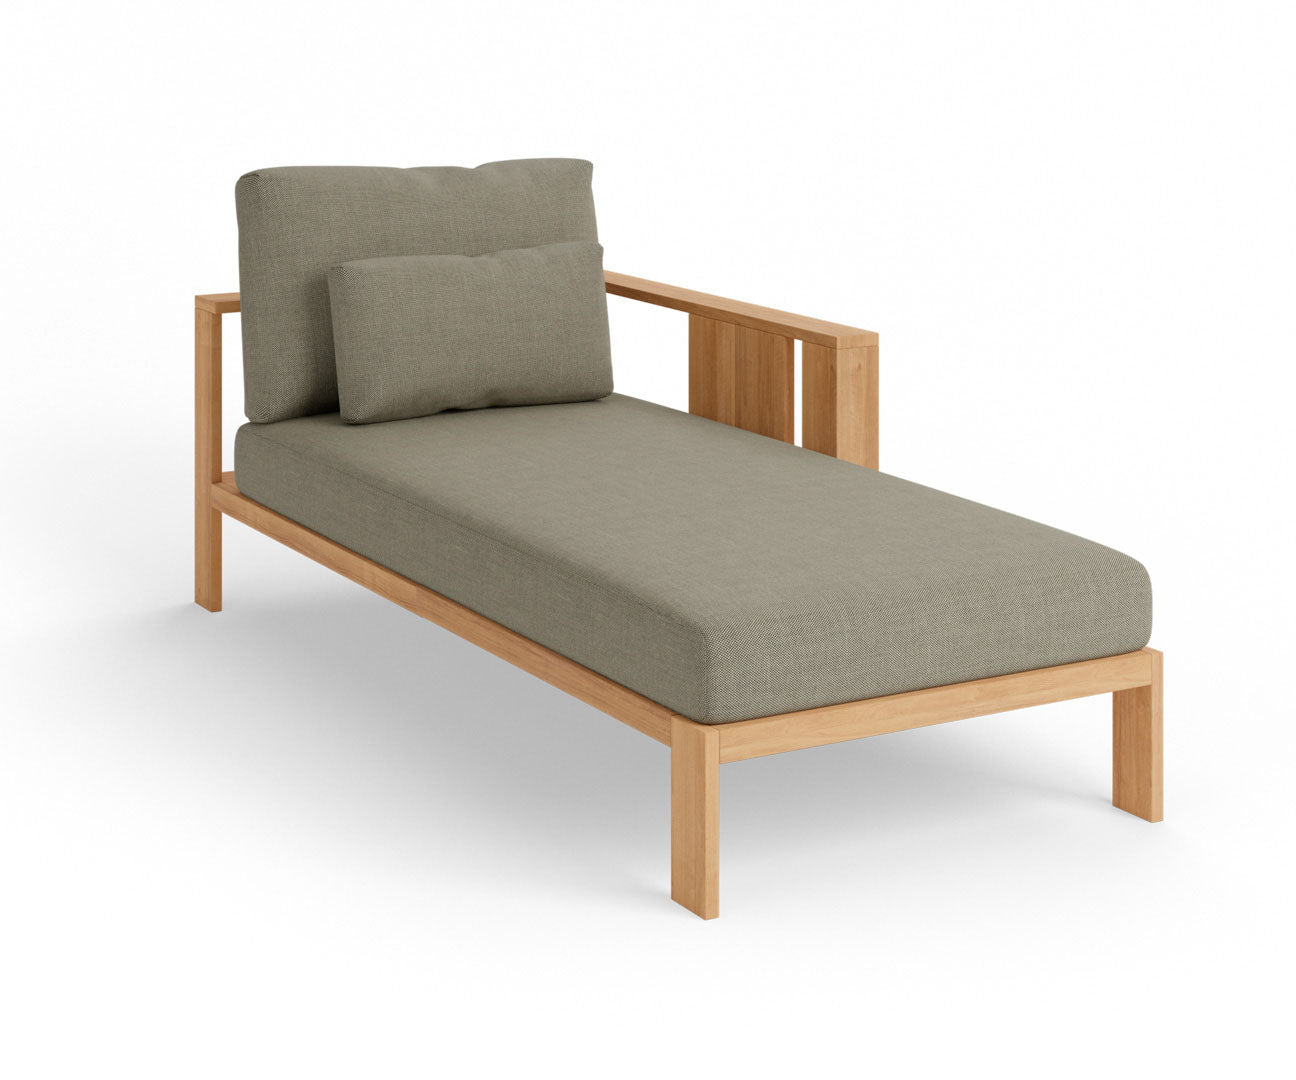 Beam Chaise Lounge R | Oiside 